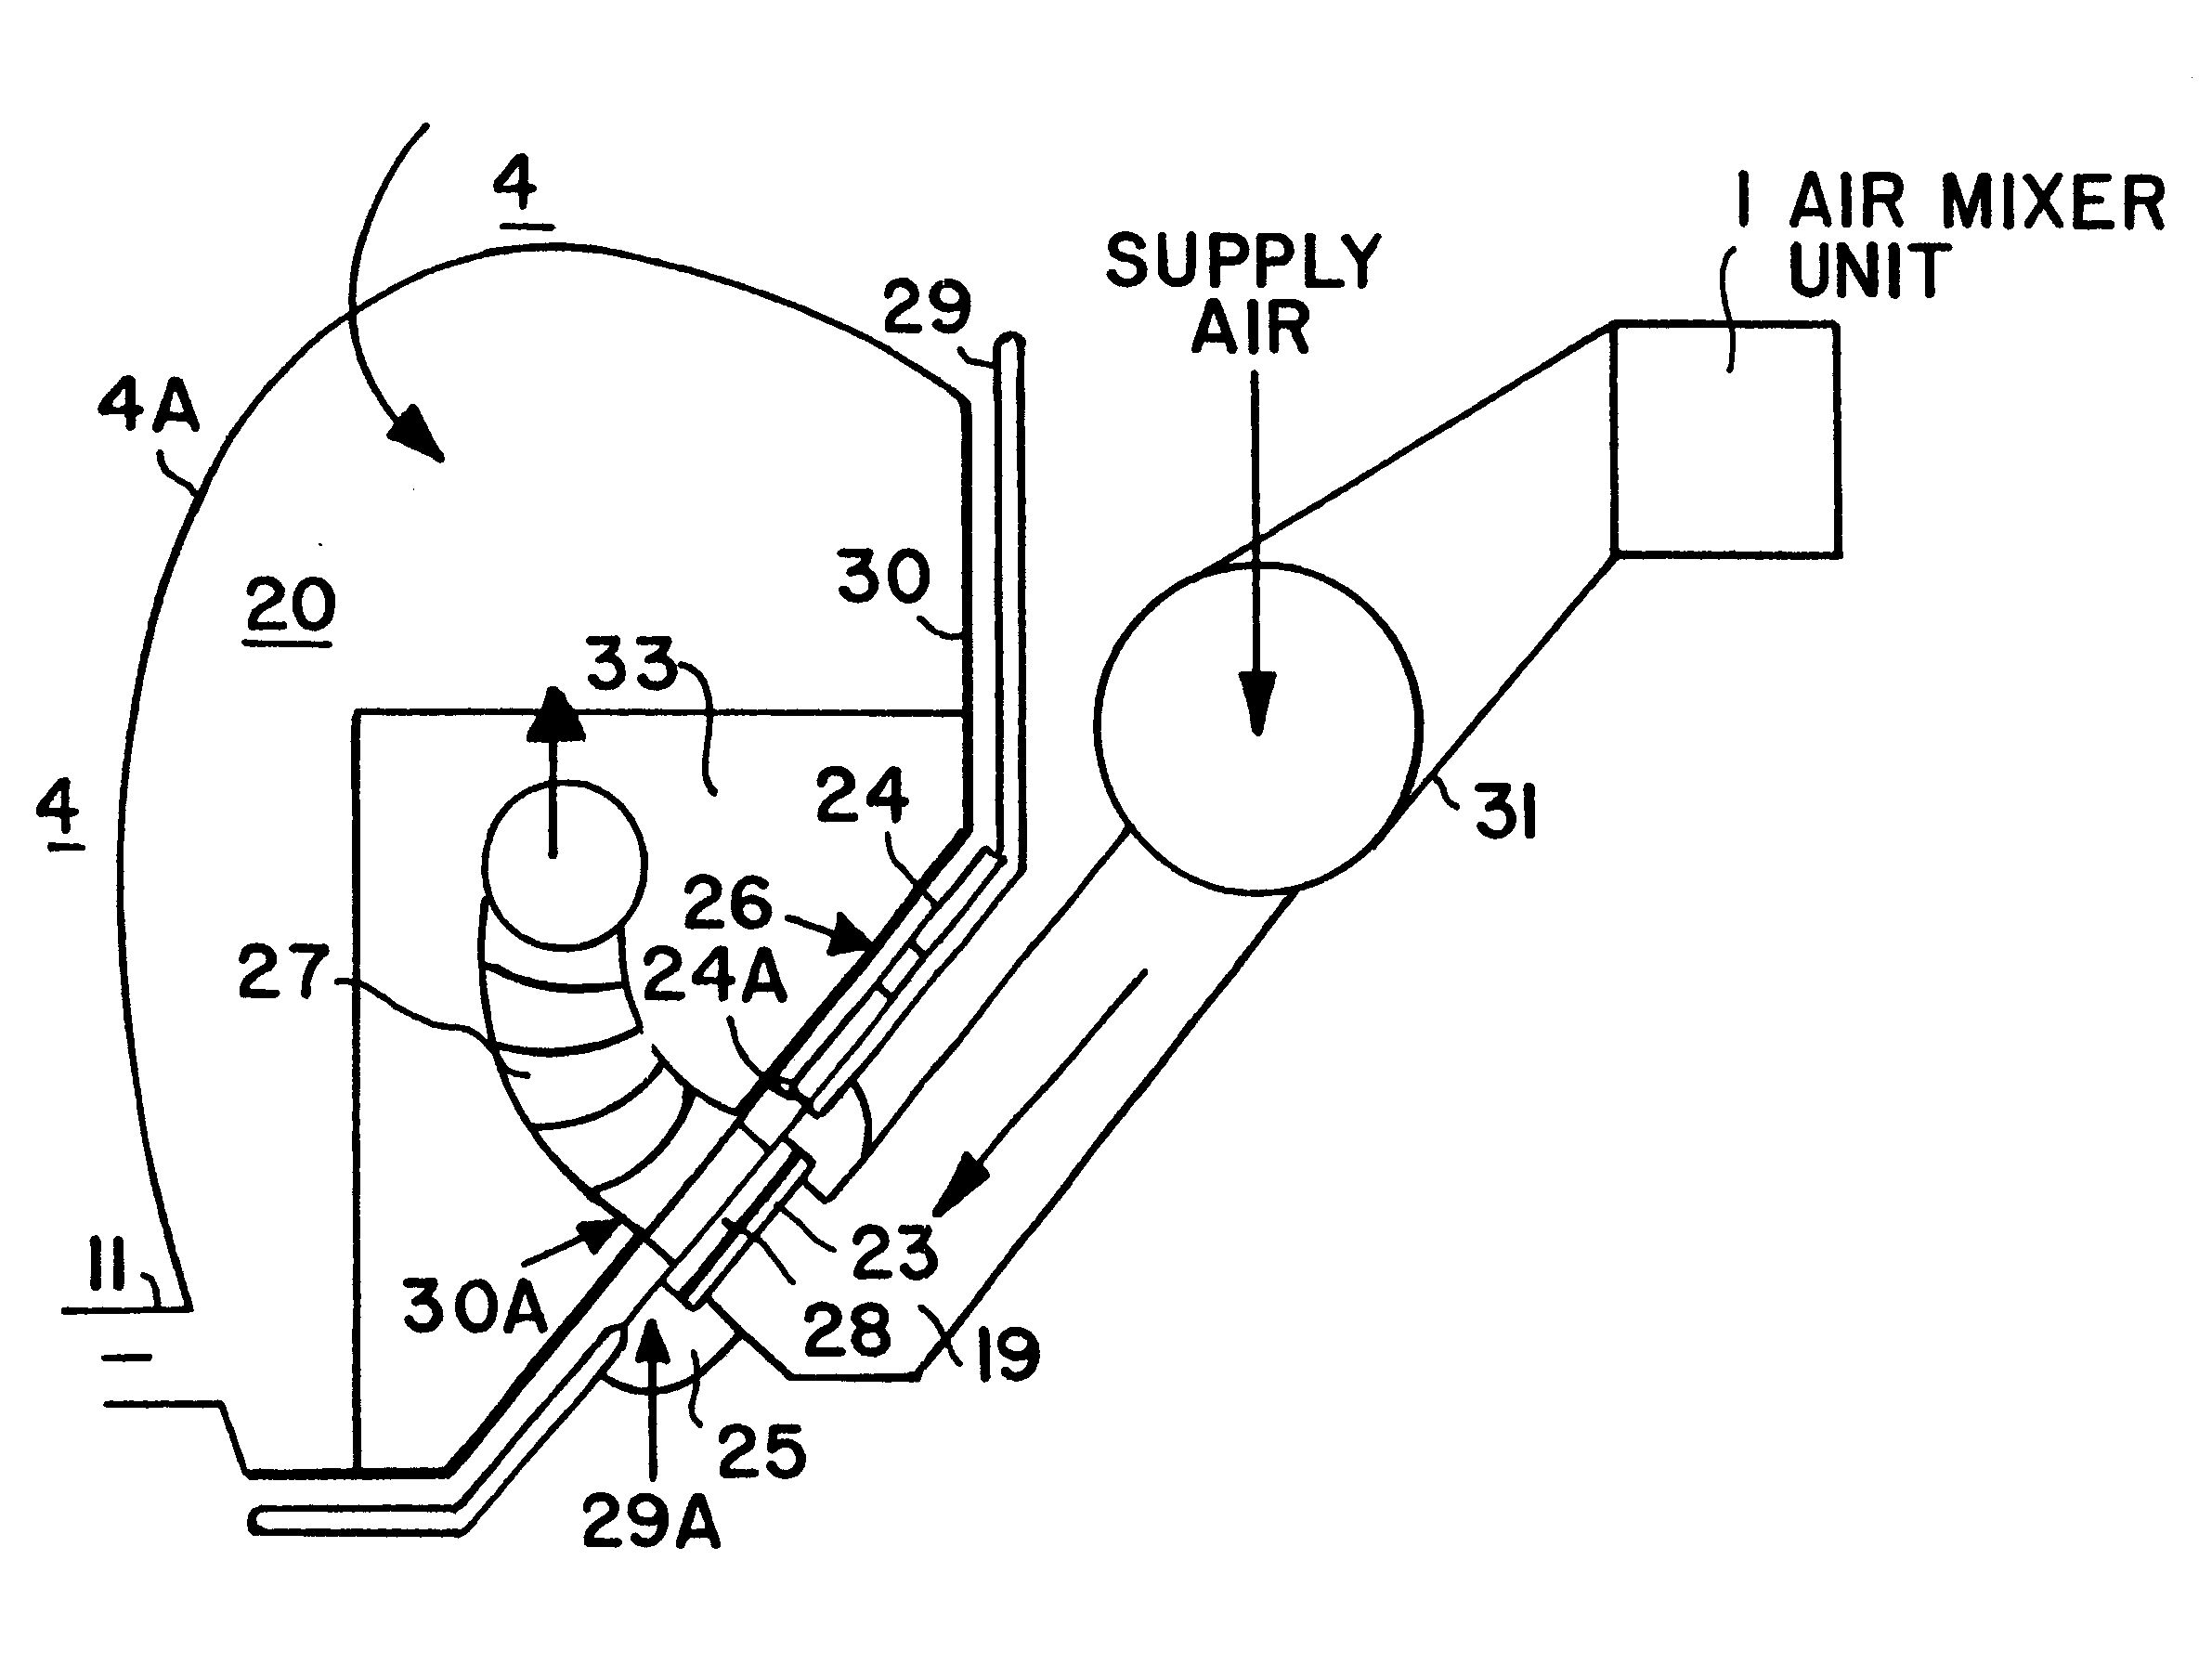 Reconfigurable air supply arrangement of an air-conditioning system for below-deck areas of a passenger aircraft